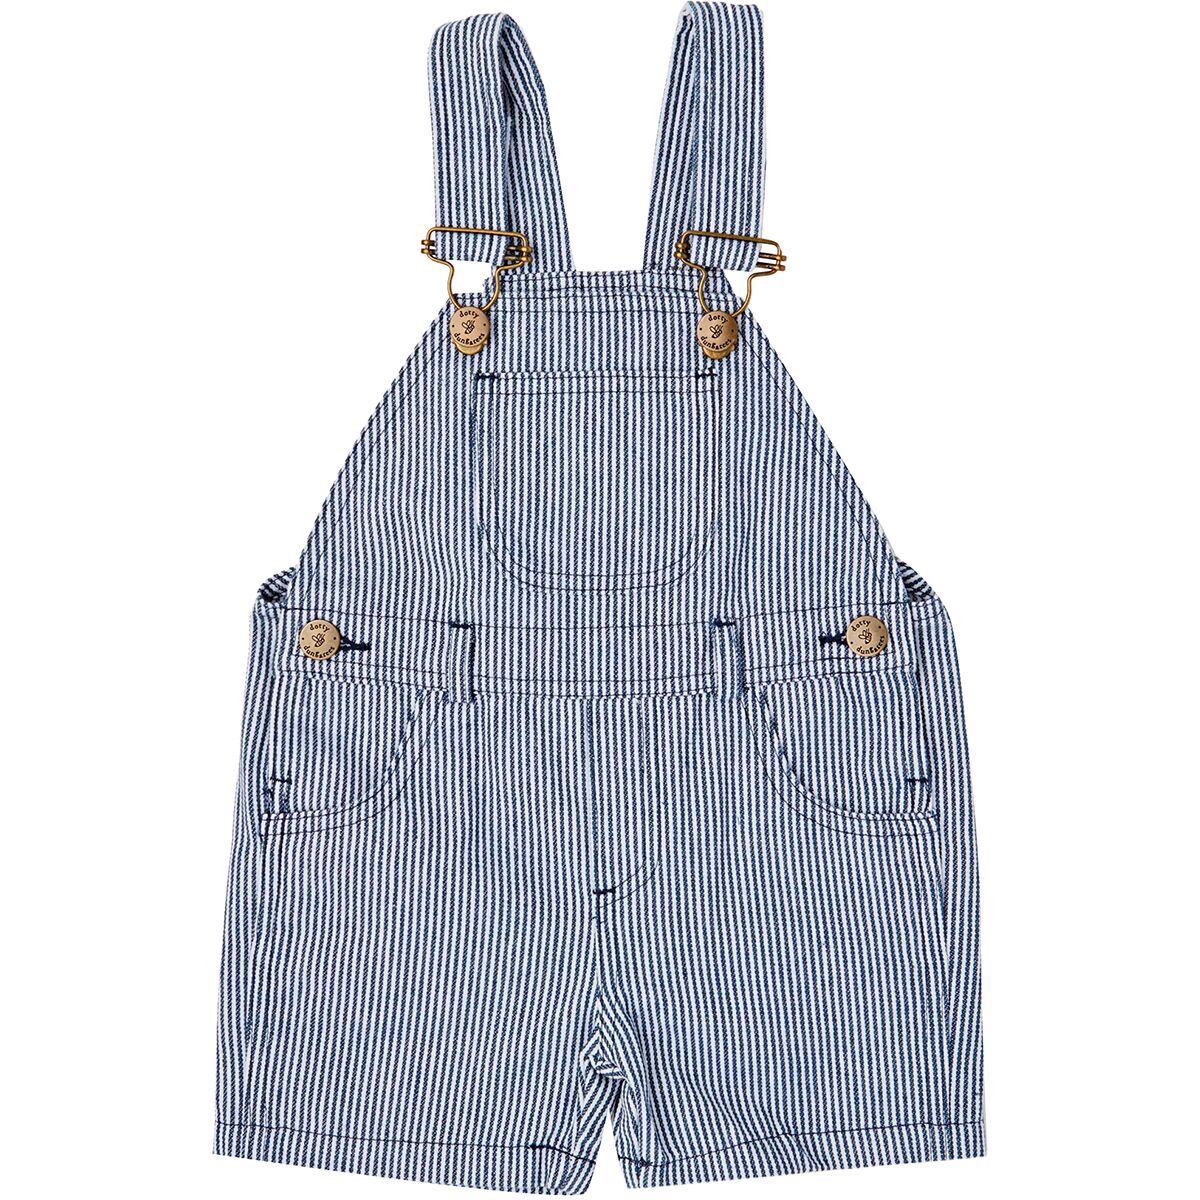 Dotty Dungarees Otto Stripe Short Overalls - Toddlers'